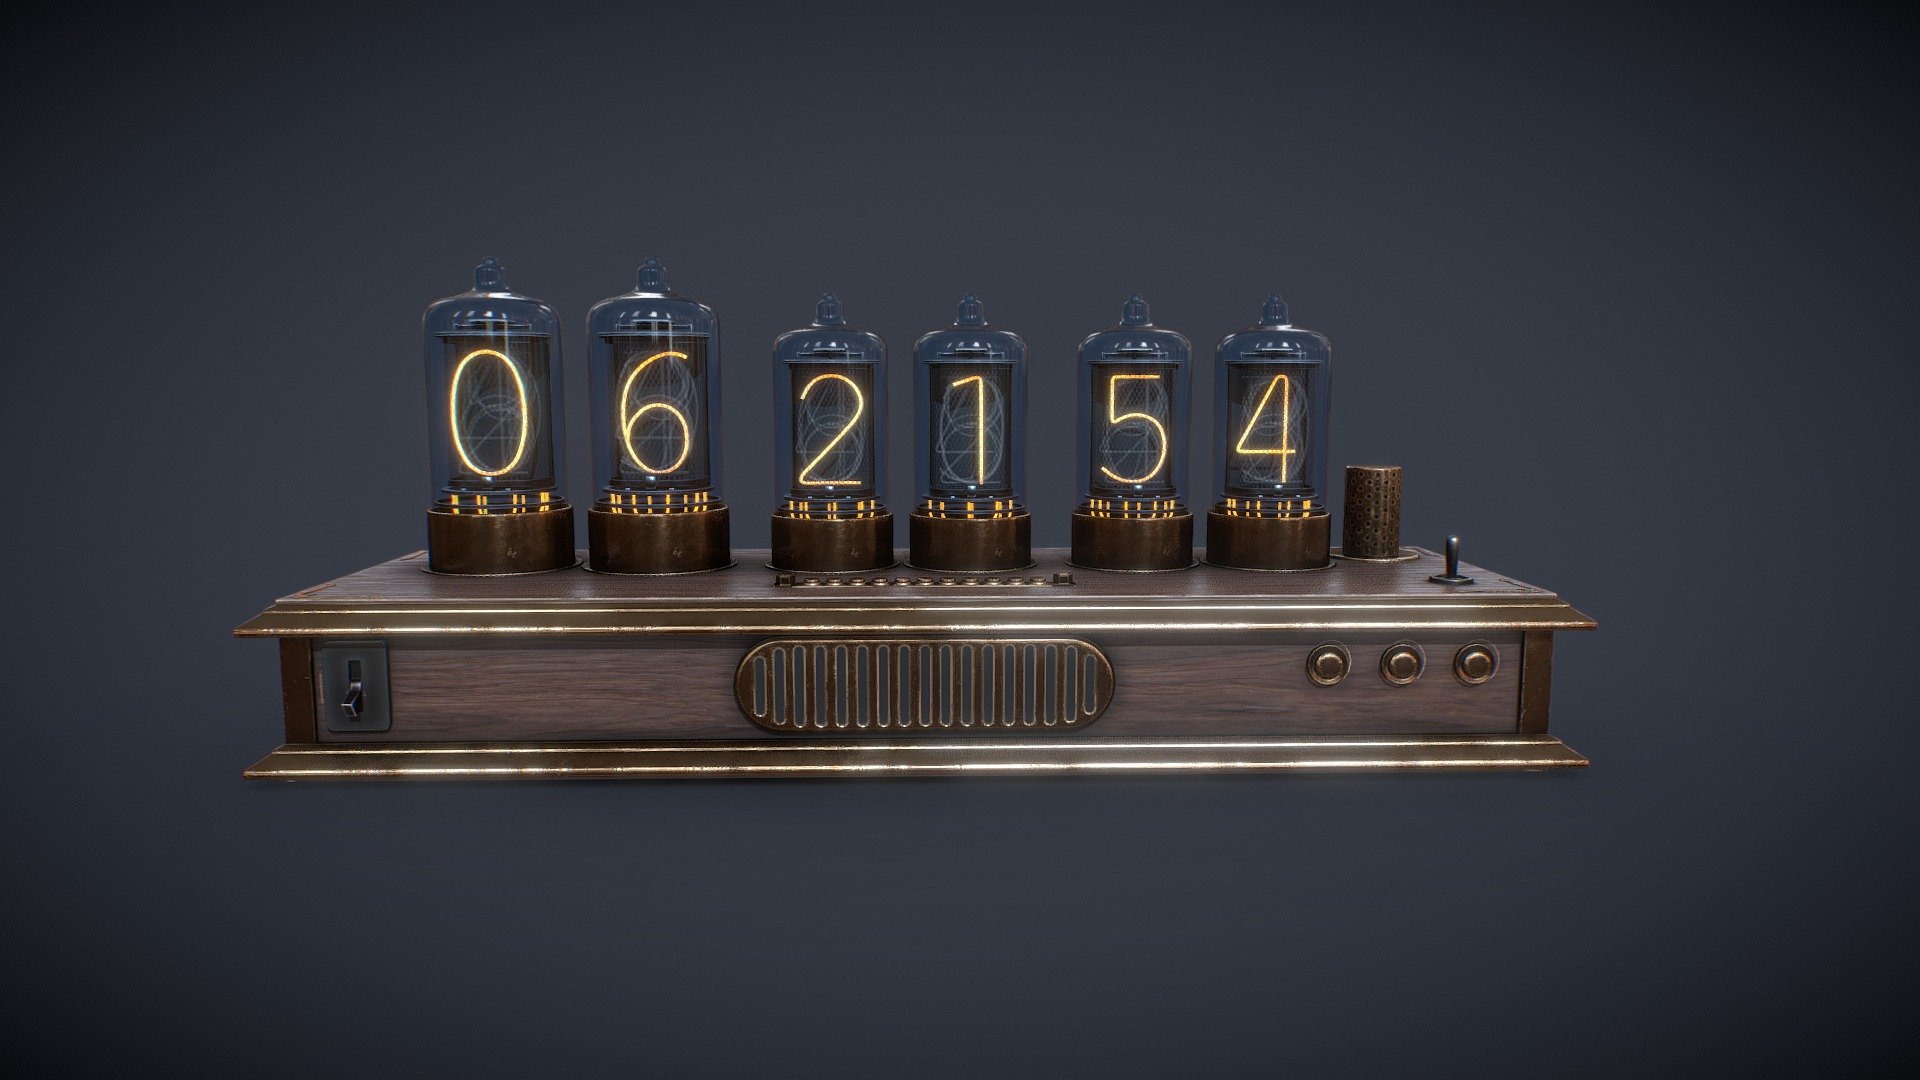 Hello All :) This is a Nixie Tube clock made for a victorian project, nice object to give you time and warm ligth.
Polycount can be optimized easly on ligth tubes.

Made with Maya, PS and Substance.

You will find in the package Scene file, FBX and 2k Textures.
If you have any customs need, please feel free to contact me 3d model